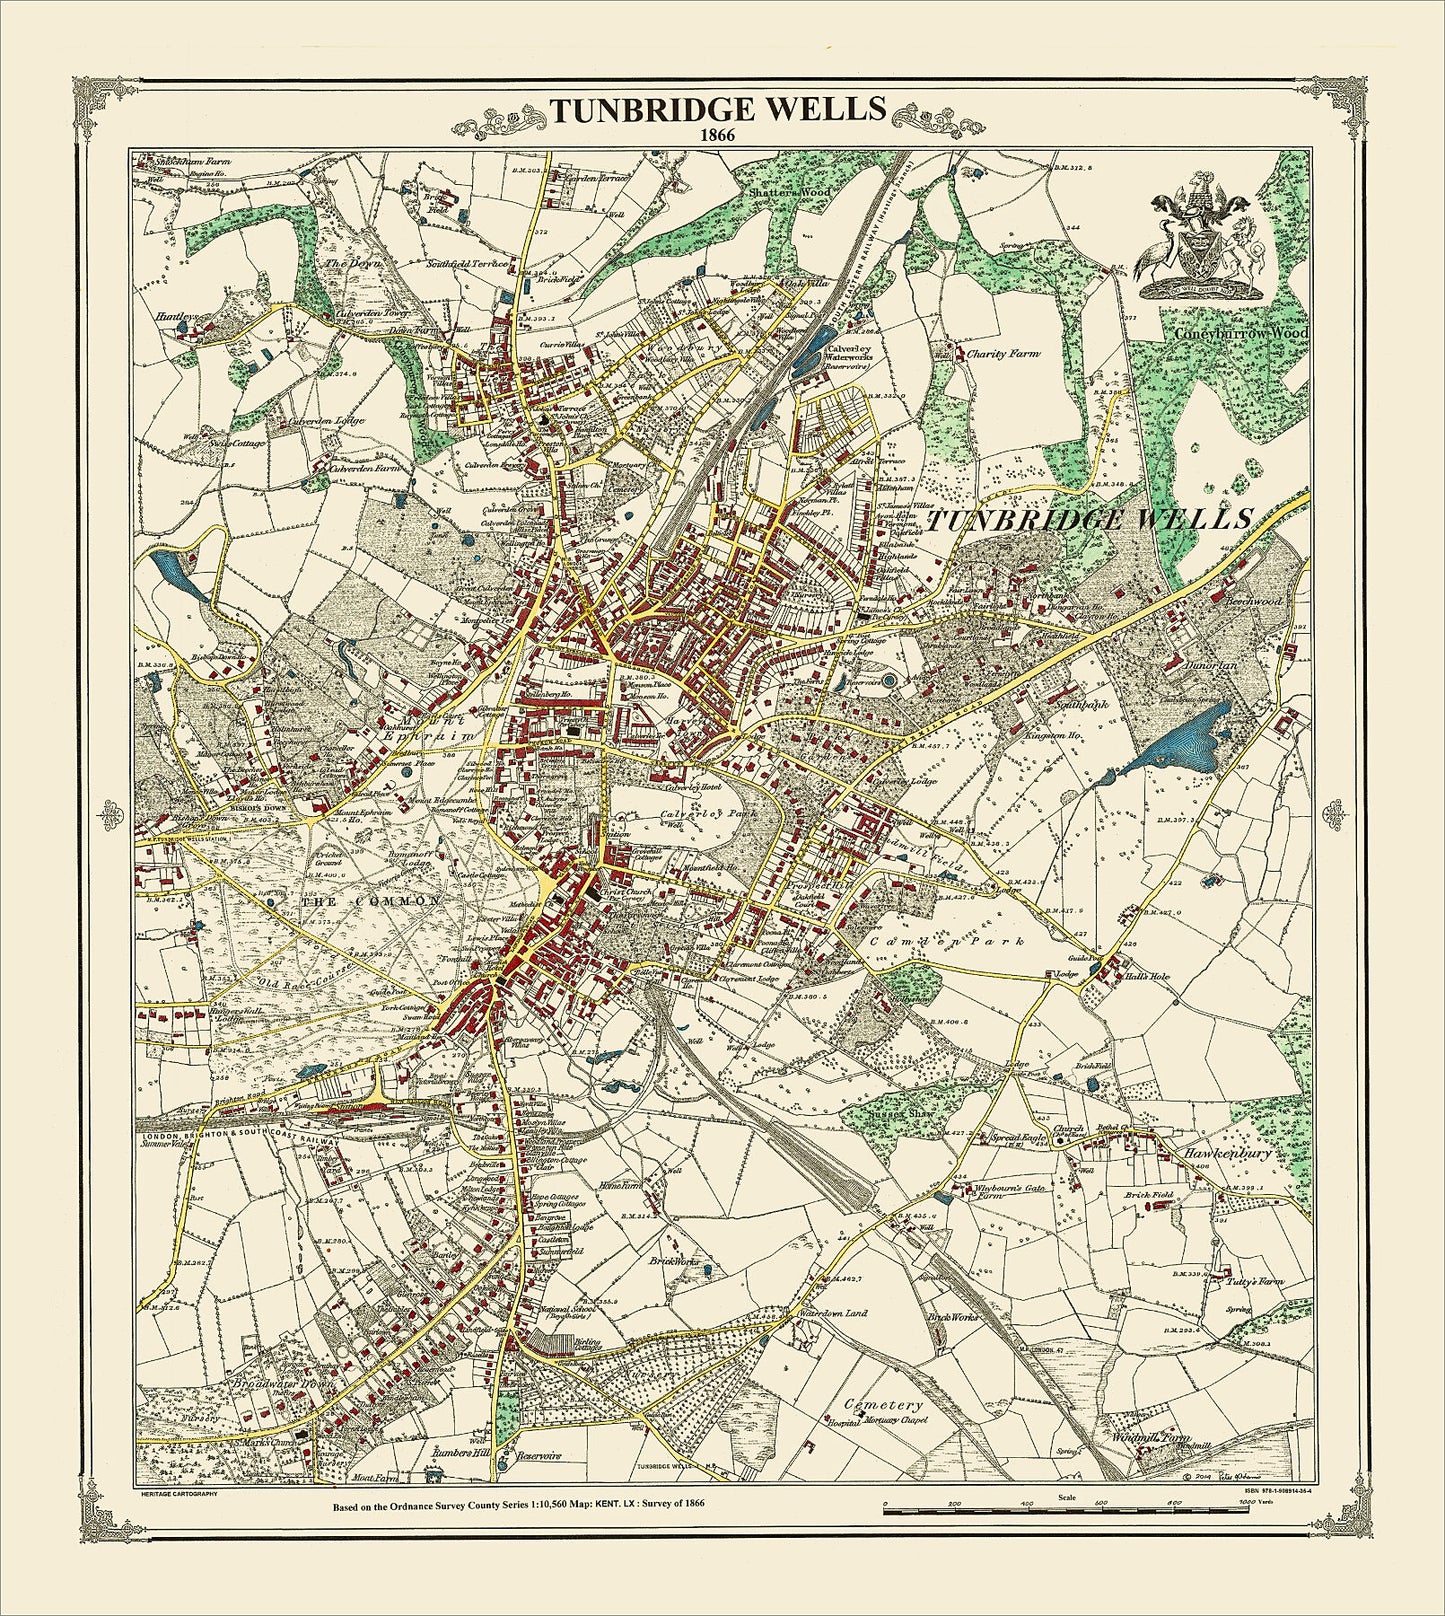 Coloured Victorian map of Tunbridge Wells in 1866 by Peter J Adams of Heritage Cartography